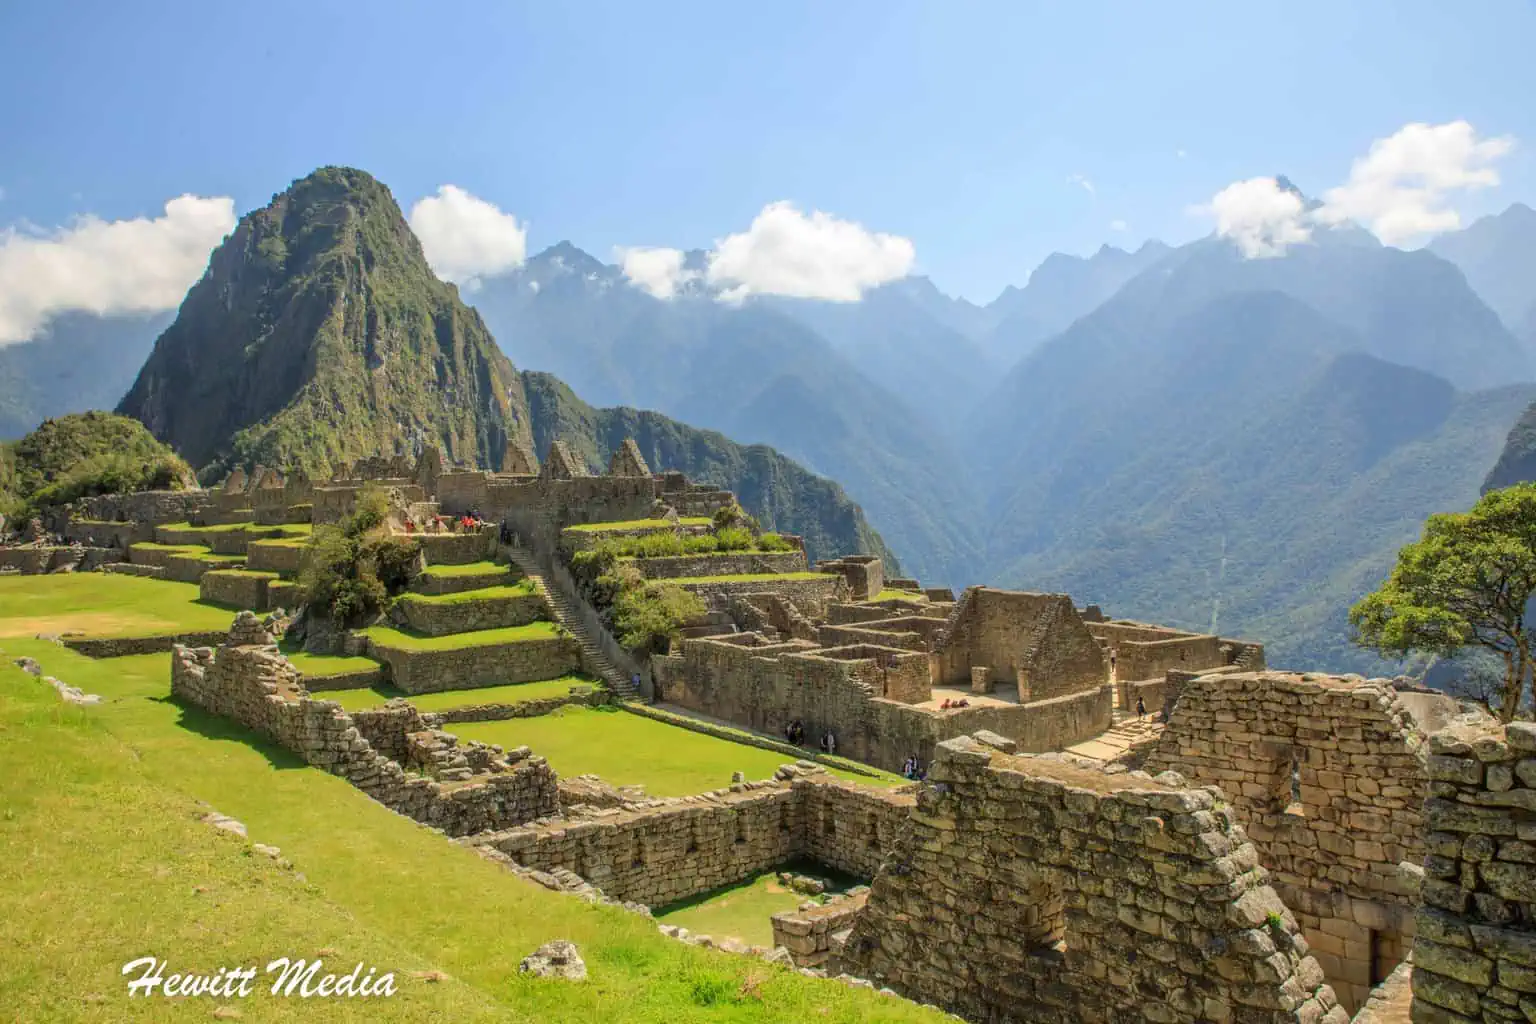 Part 2: Machu Picchu and Galapagos Planning